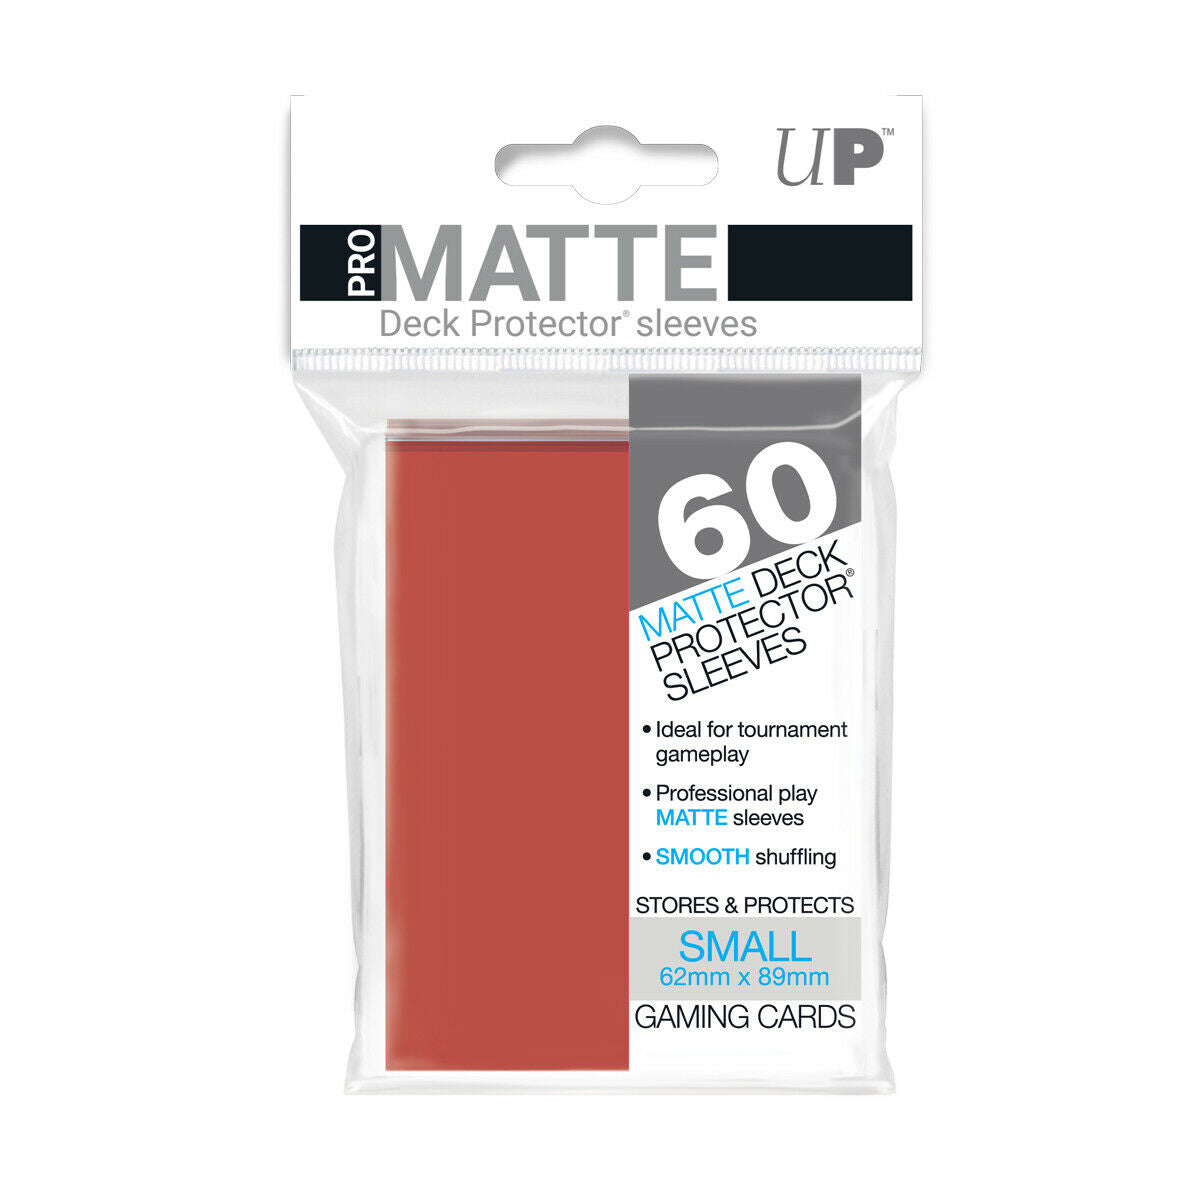 ULTRA PRO PRO-MATTE DECK PROTECTOR SLEEVES - SMALL - RED